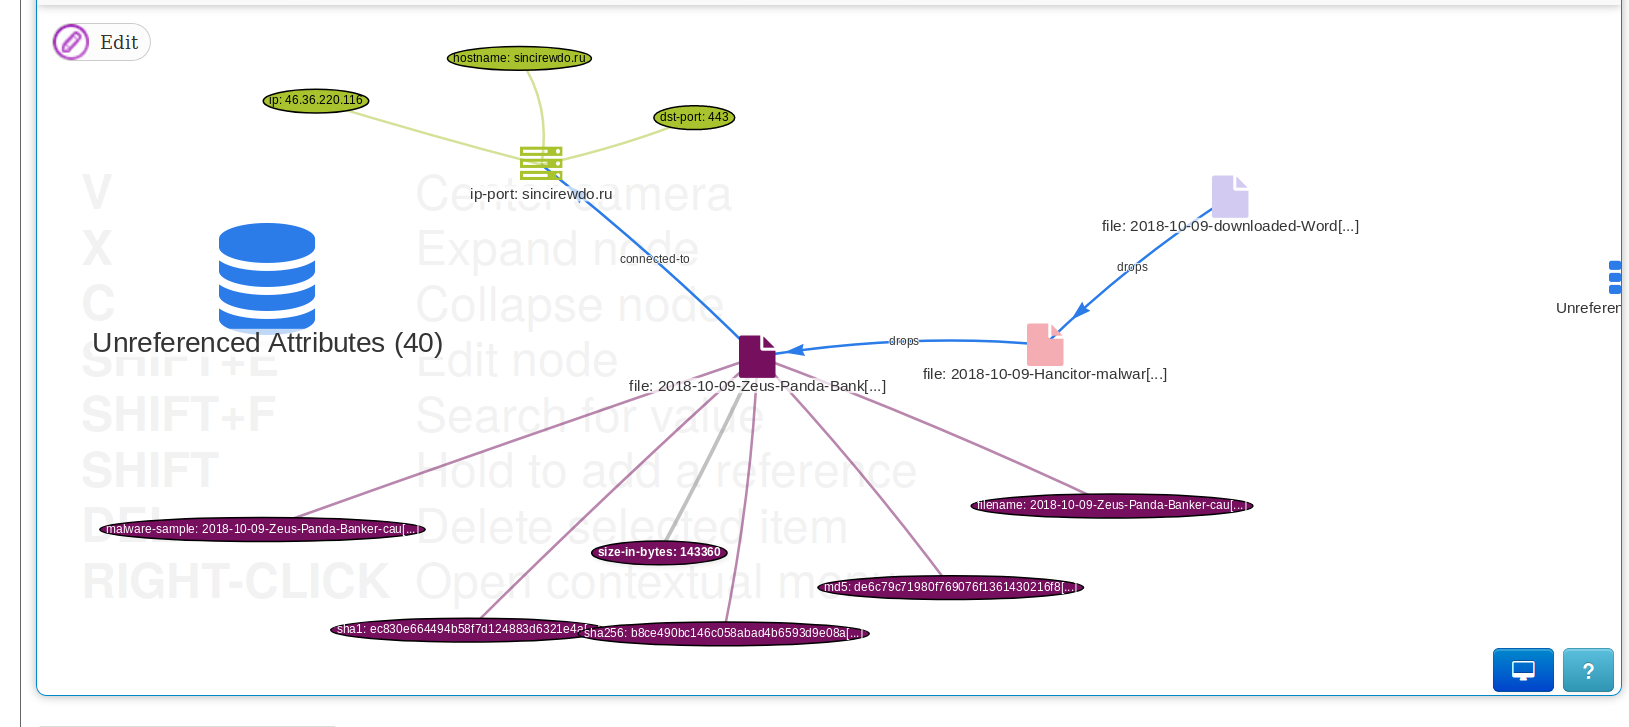 MISP event graph to display an overview of the relationships for a malware infection